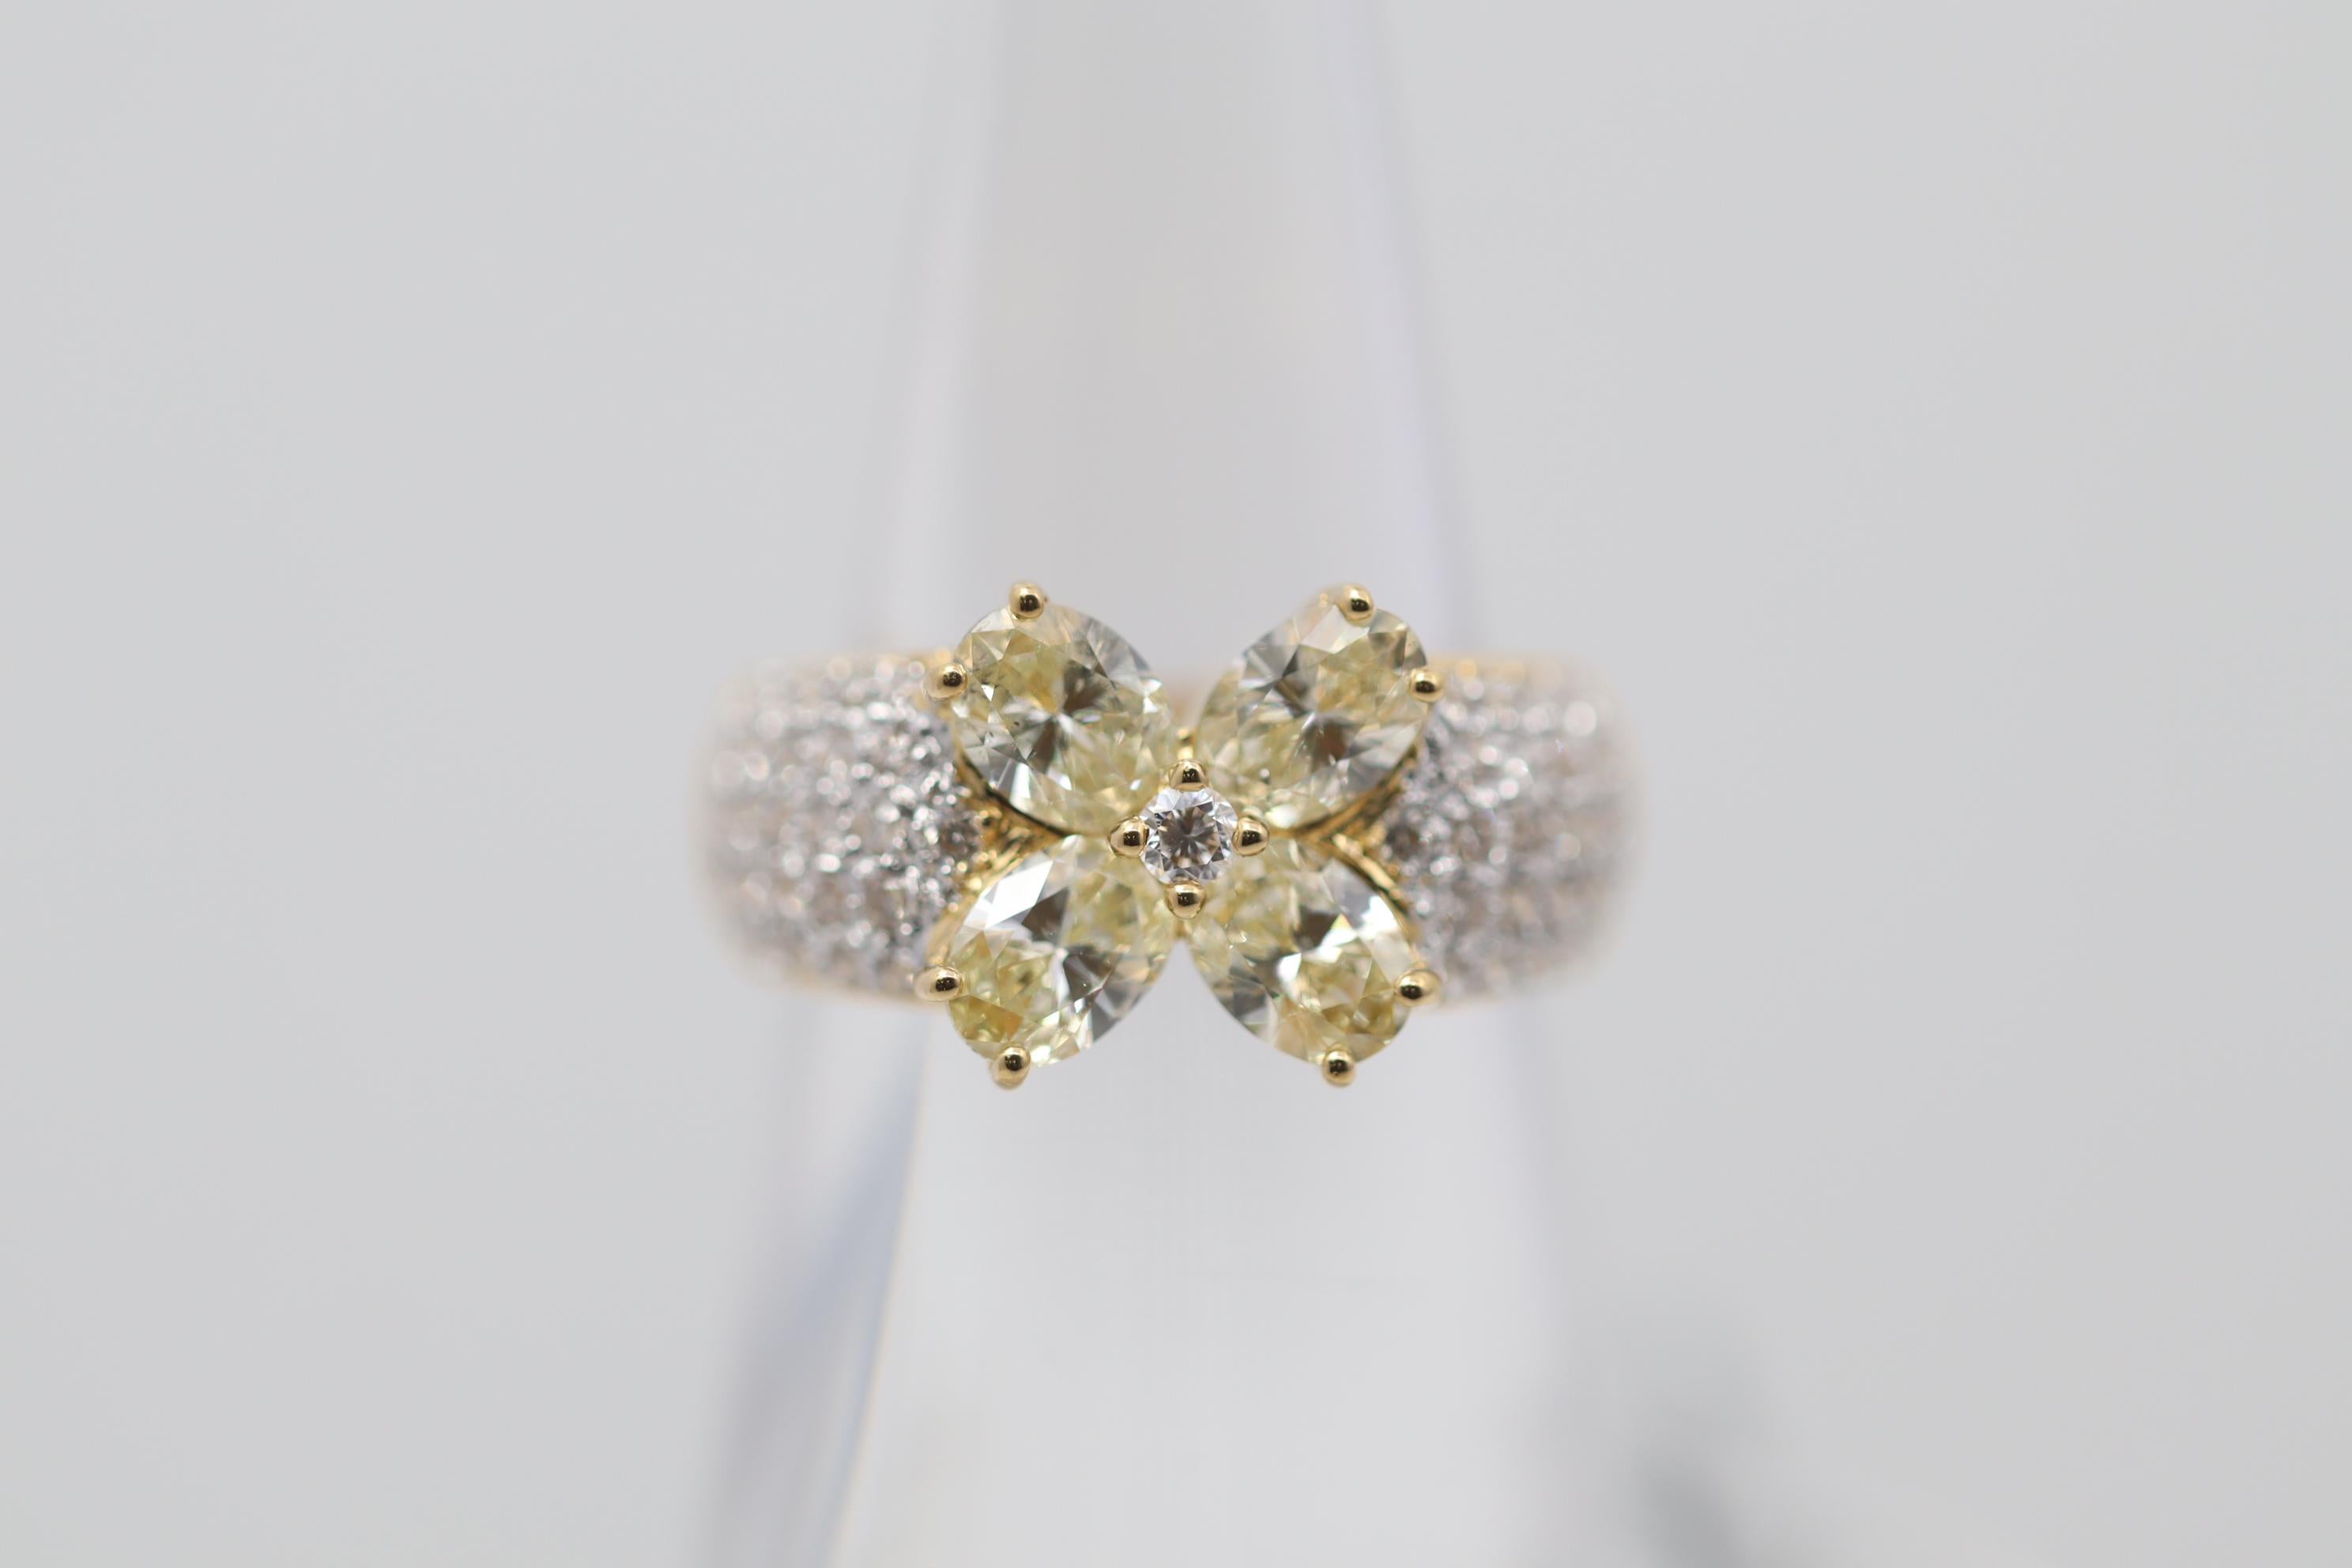 A cute yet substantial diamond ring featuring four large fancy yellow pear-shaped diamonds set together in the center of the ring to create a sweet flower. The four pear-shape diamonds weigh a total of 1.51 carats and are complemented by additional